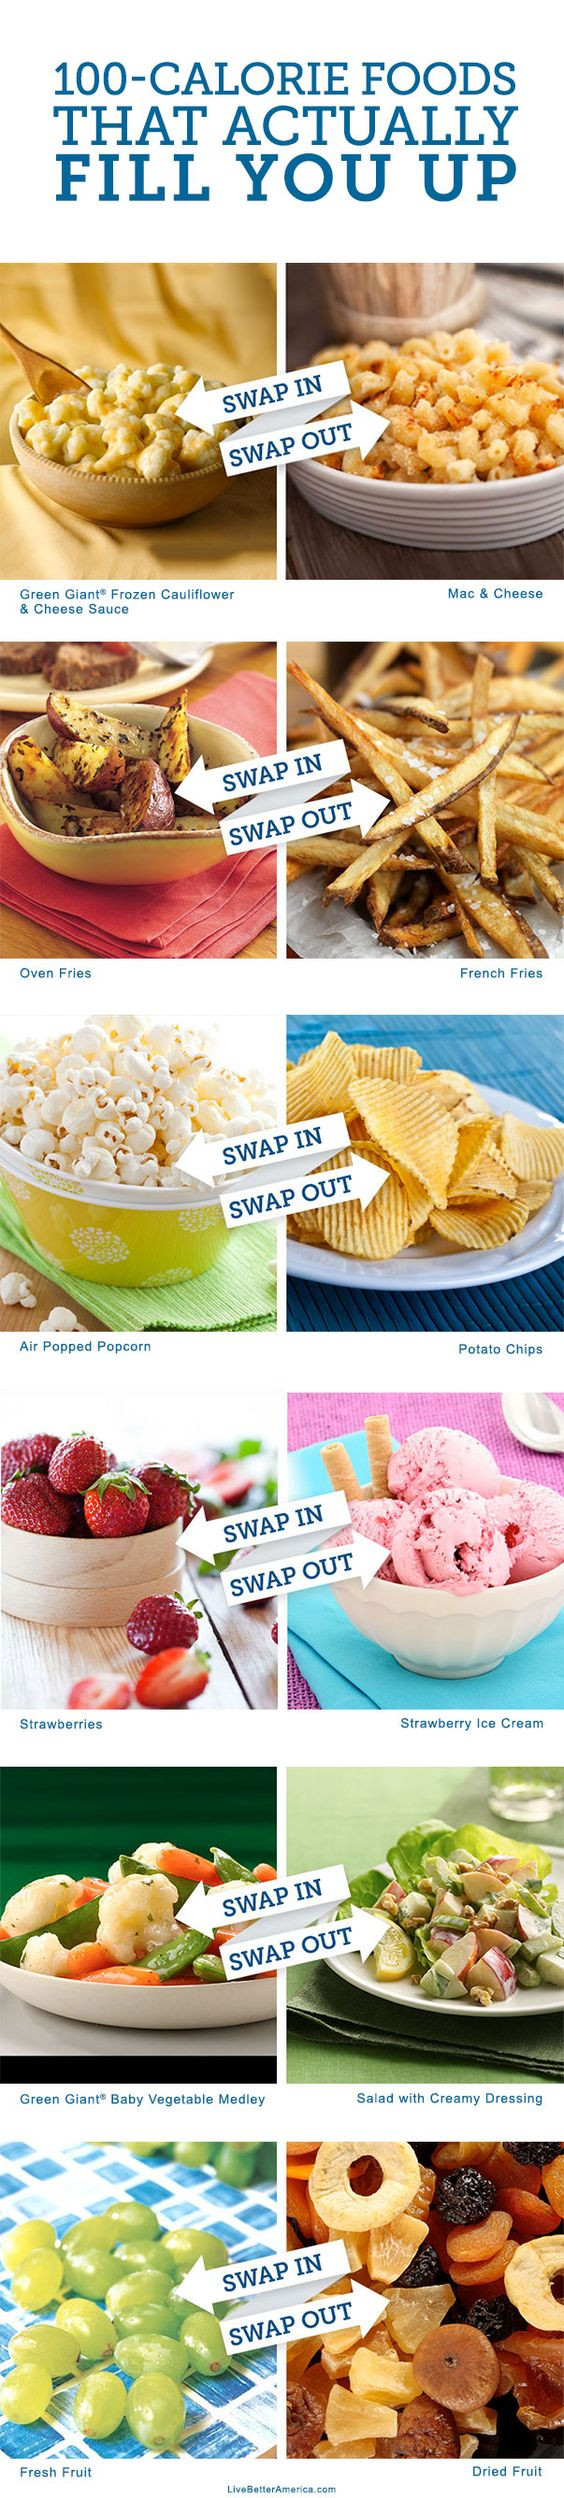 Healthy Snacks That Fill You Up
 100 Calorie Foods That Really Fill You Up simple food